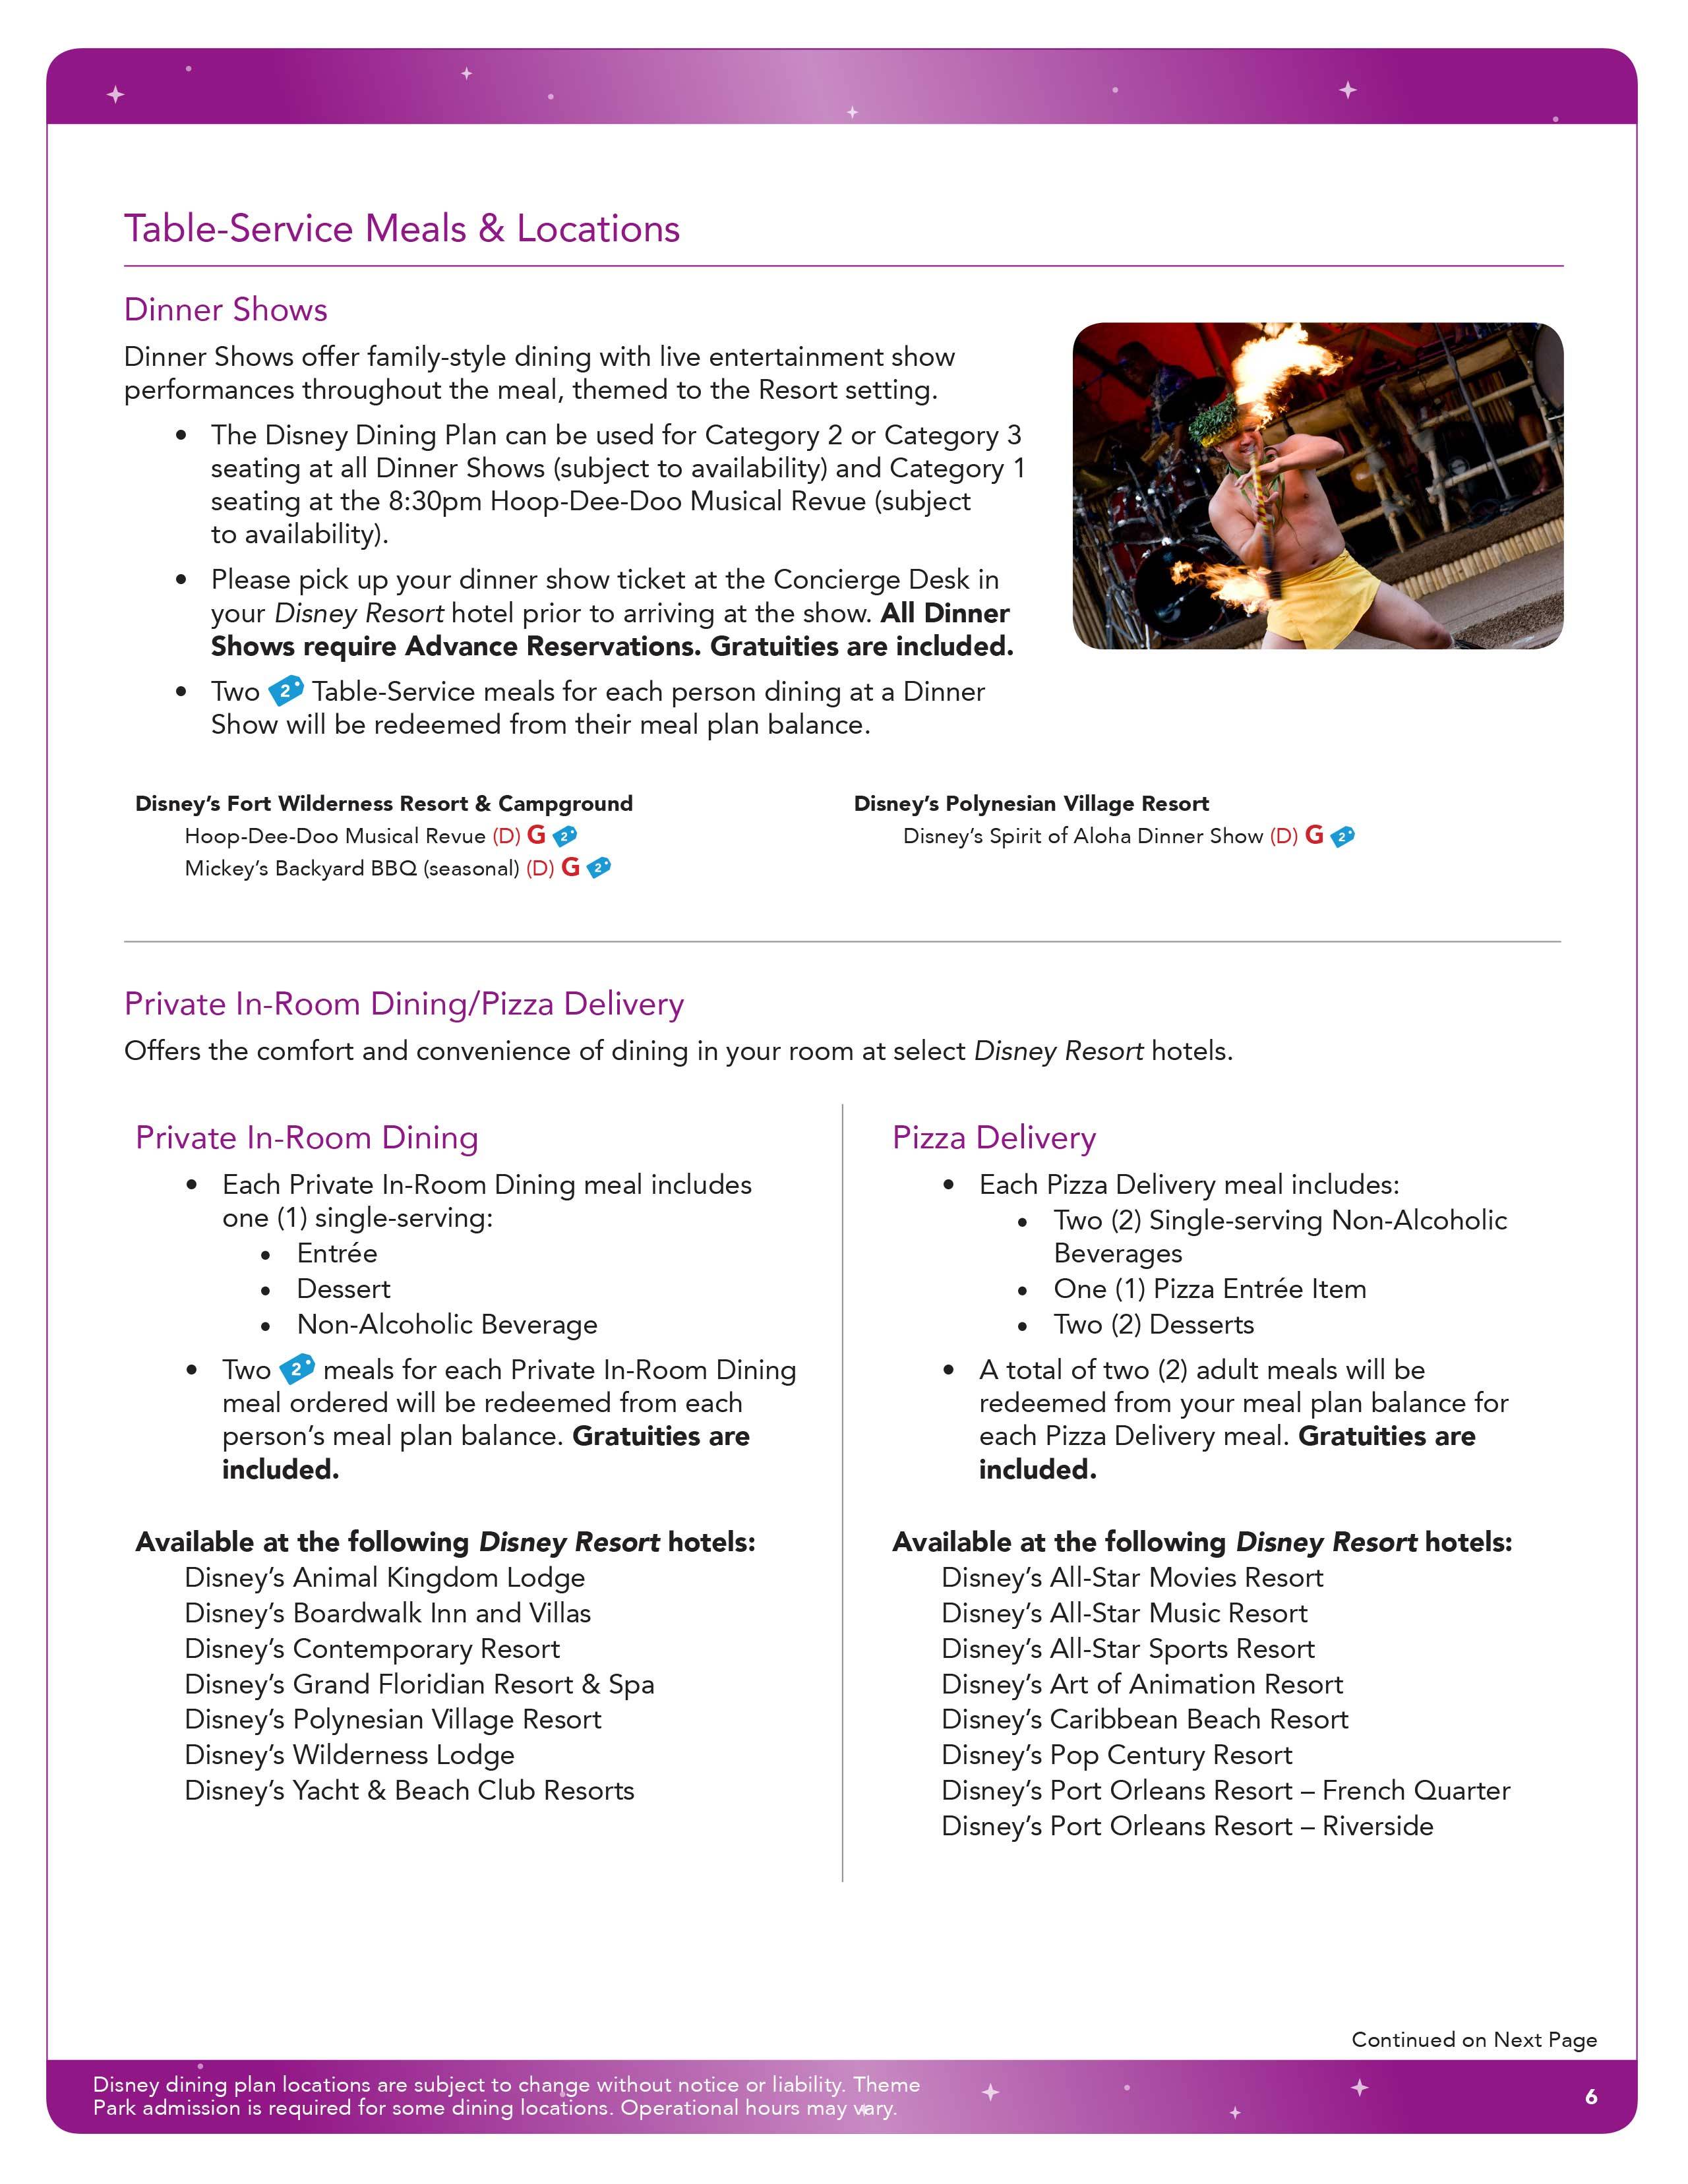 2016 Disney Dining Plan brochures updated to include appetizers for Deluxe plan